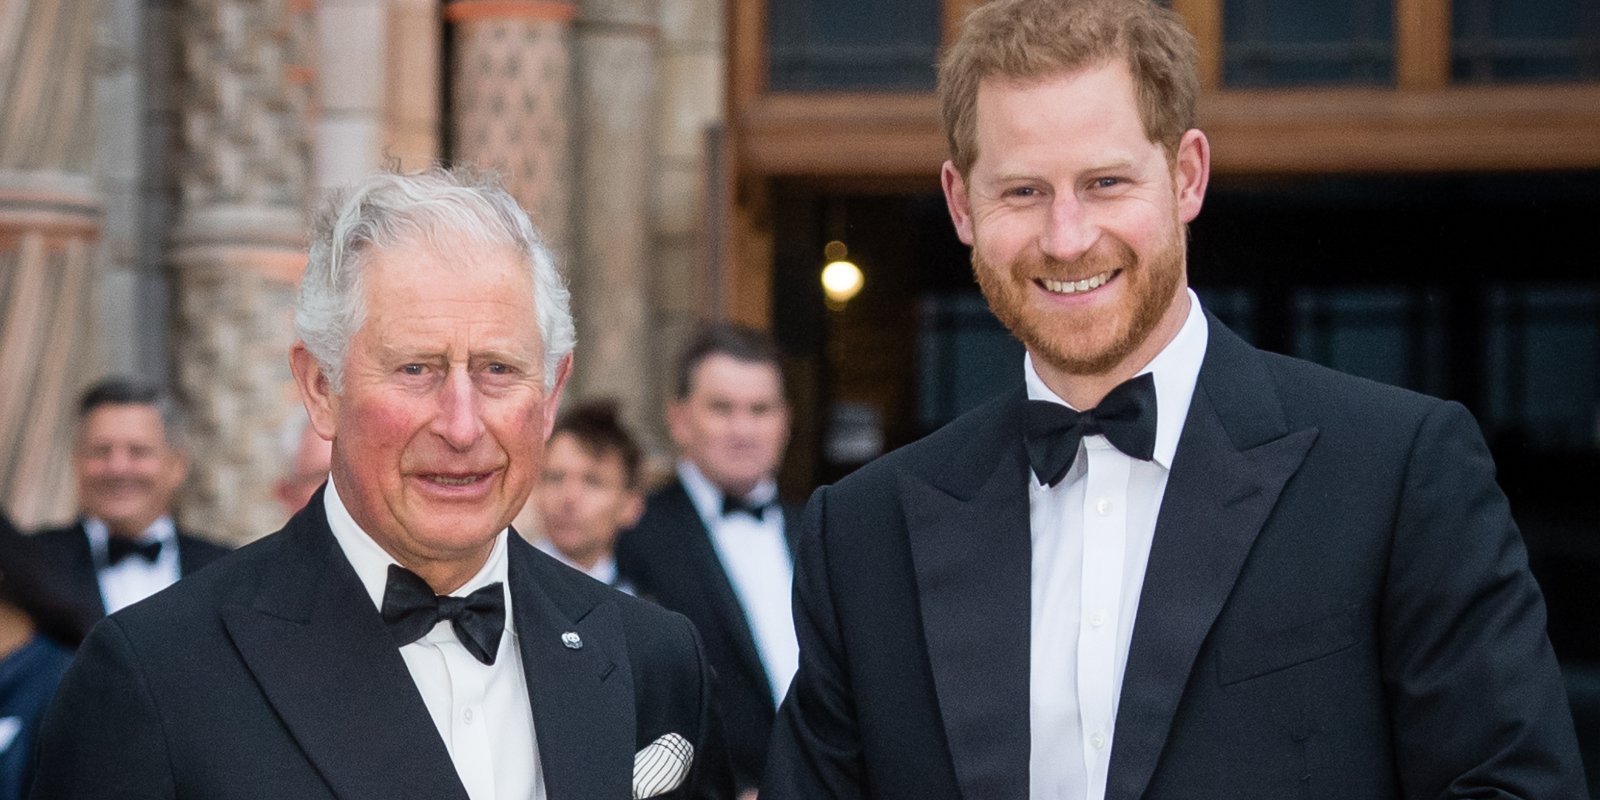 King Charles III and Prince Harry dressed in tuxedos.